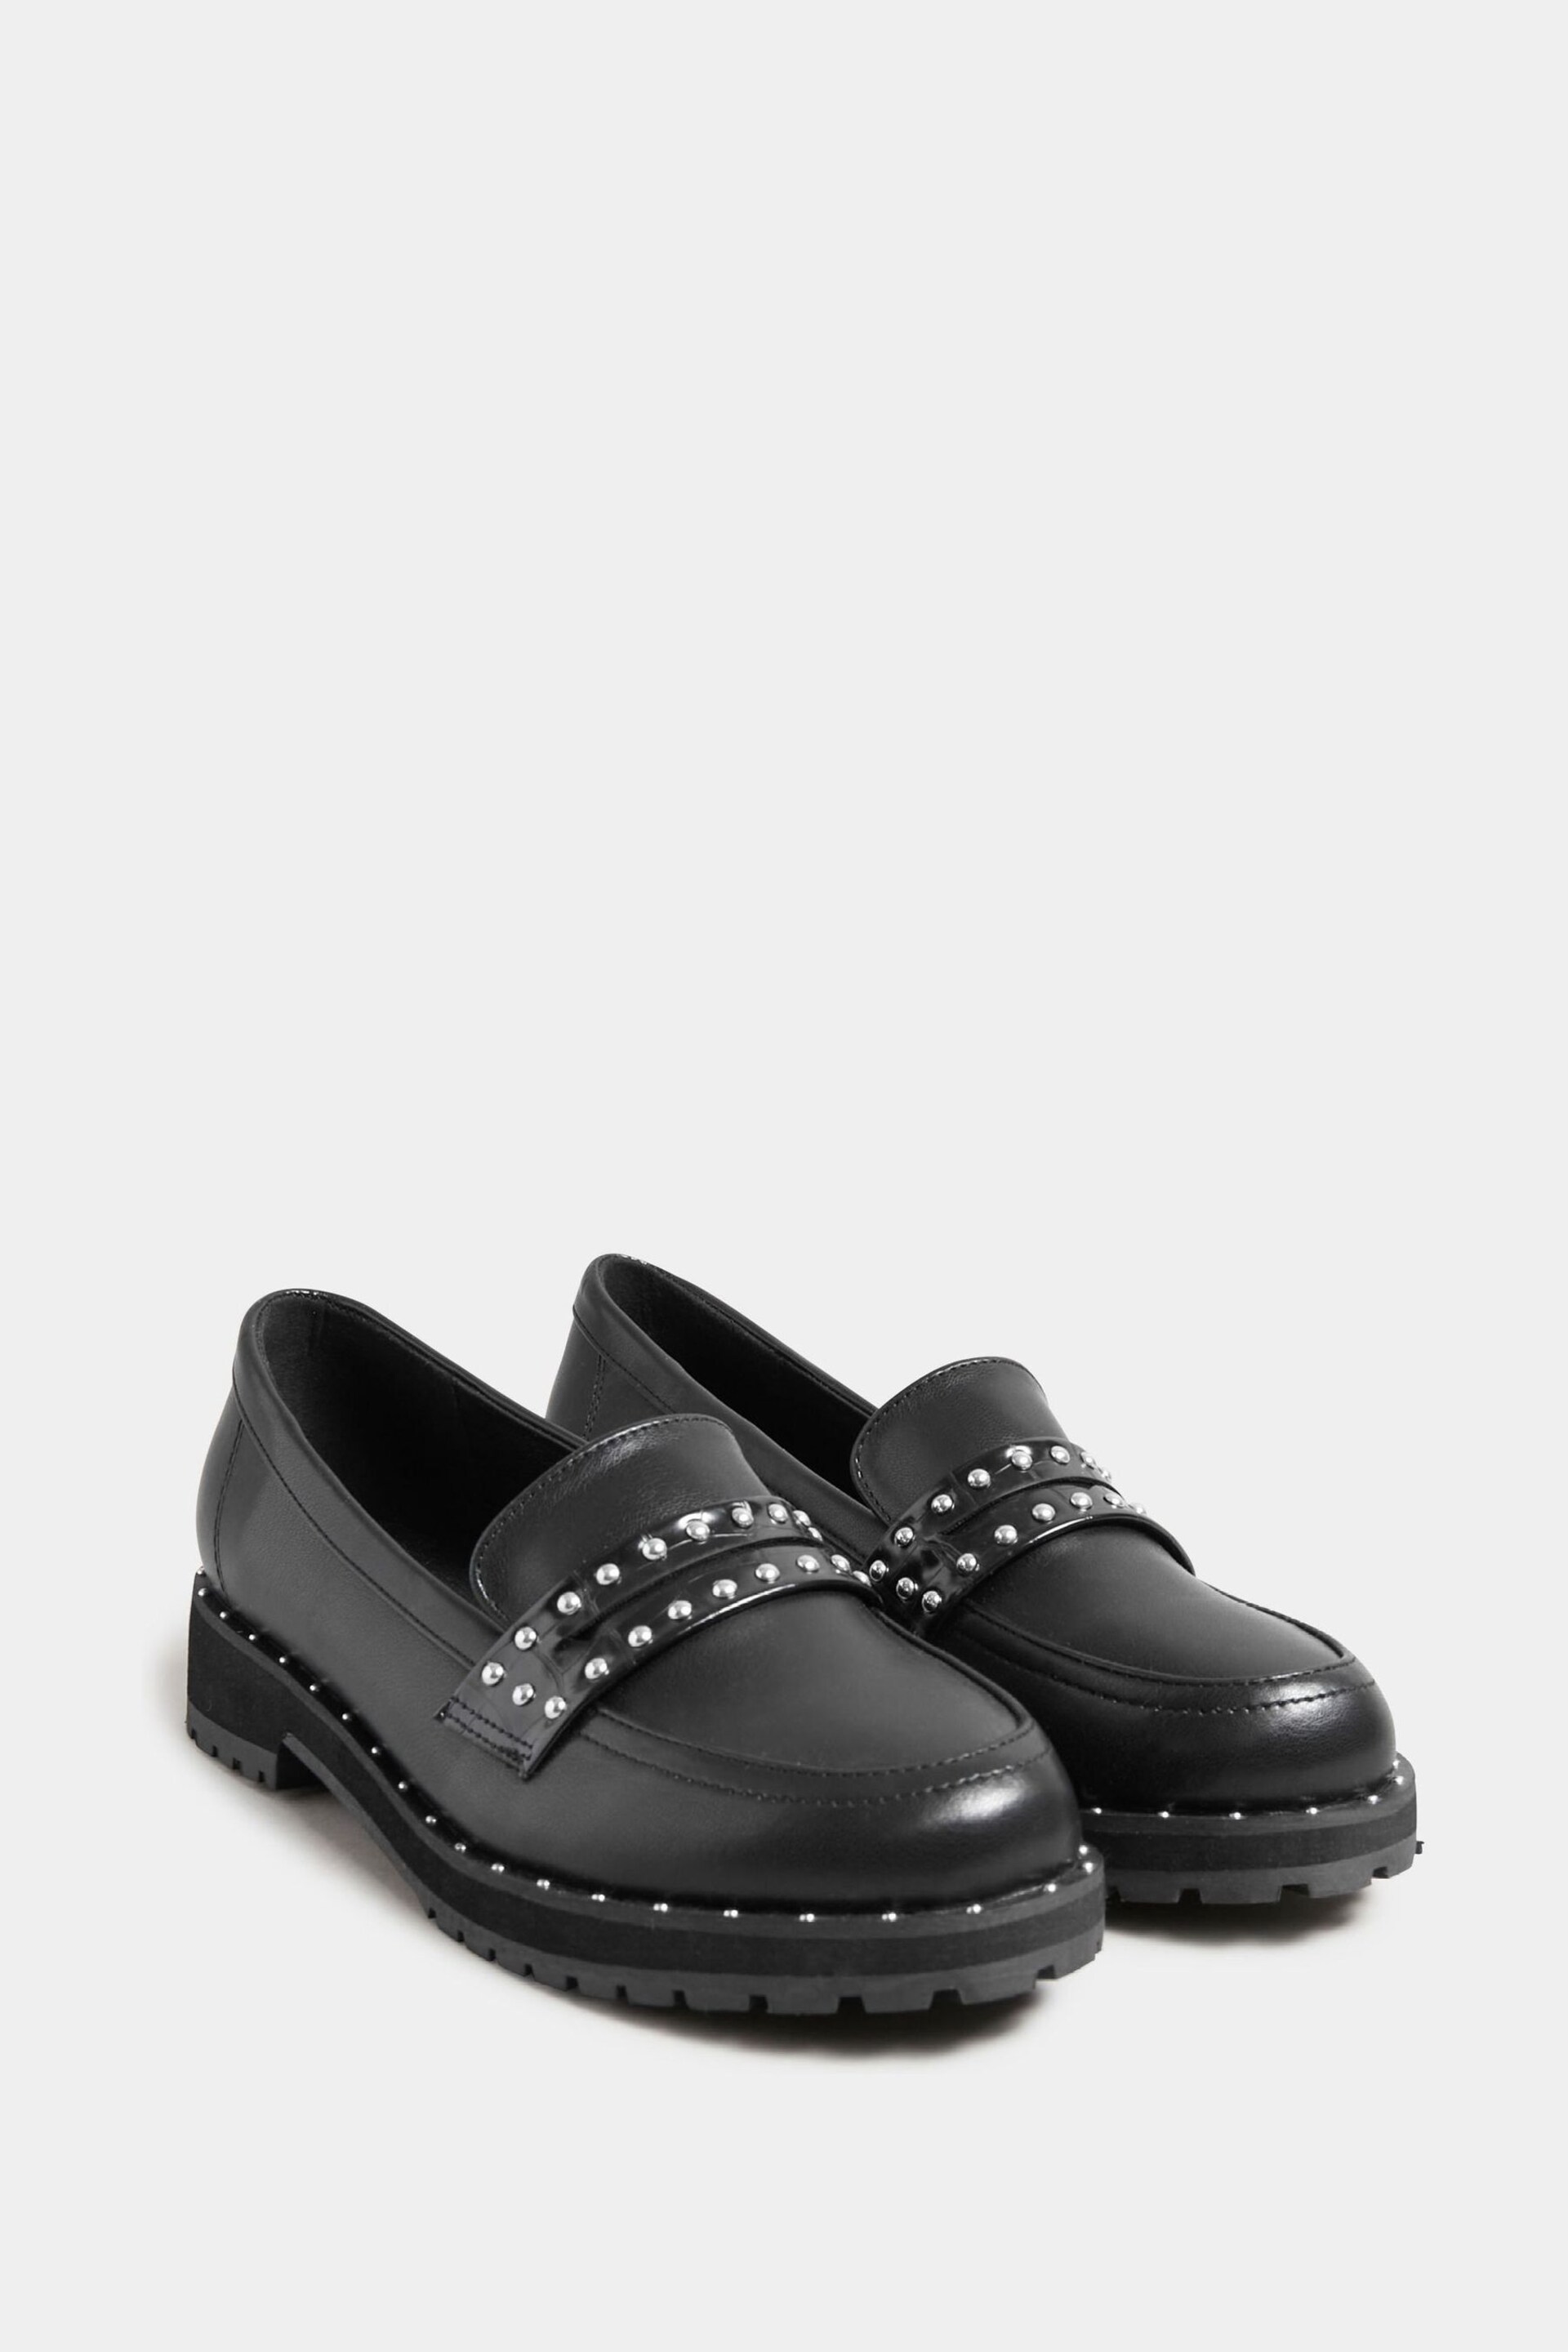 Long Tall Sally Black Studded Loafers - Image 2 of 3